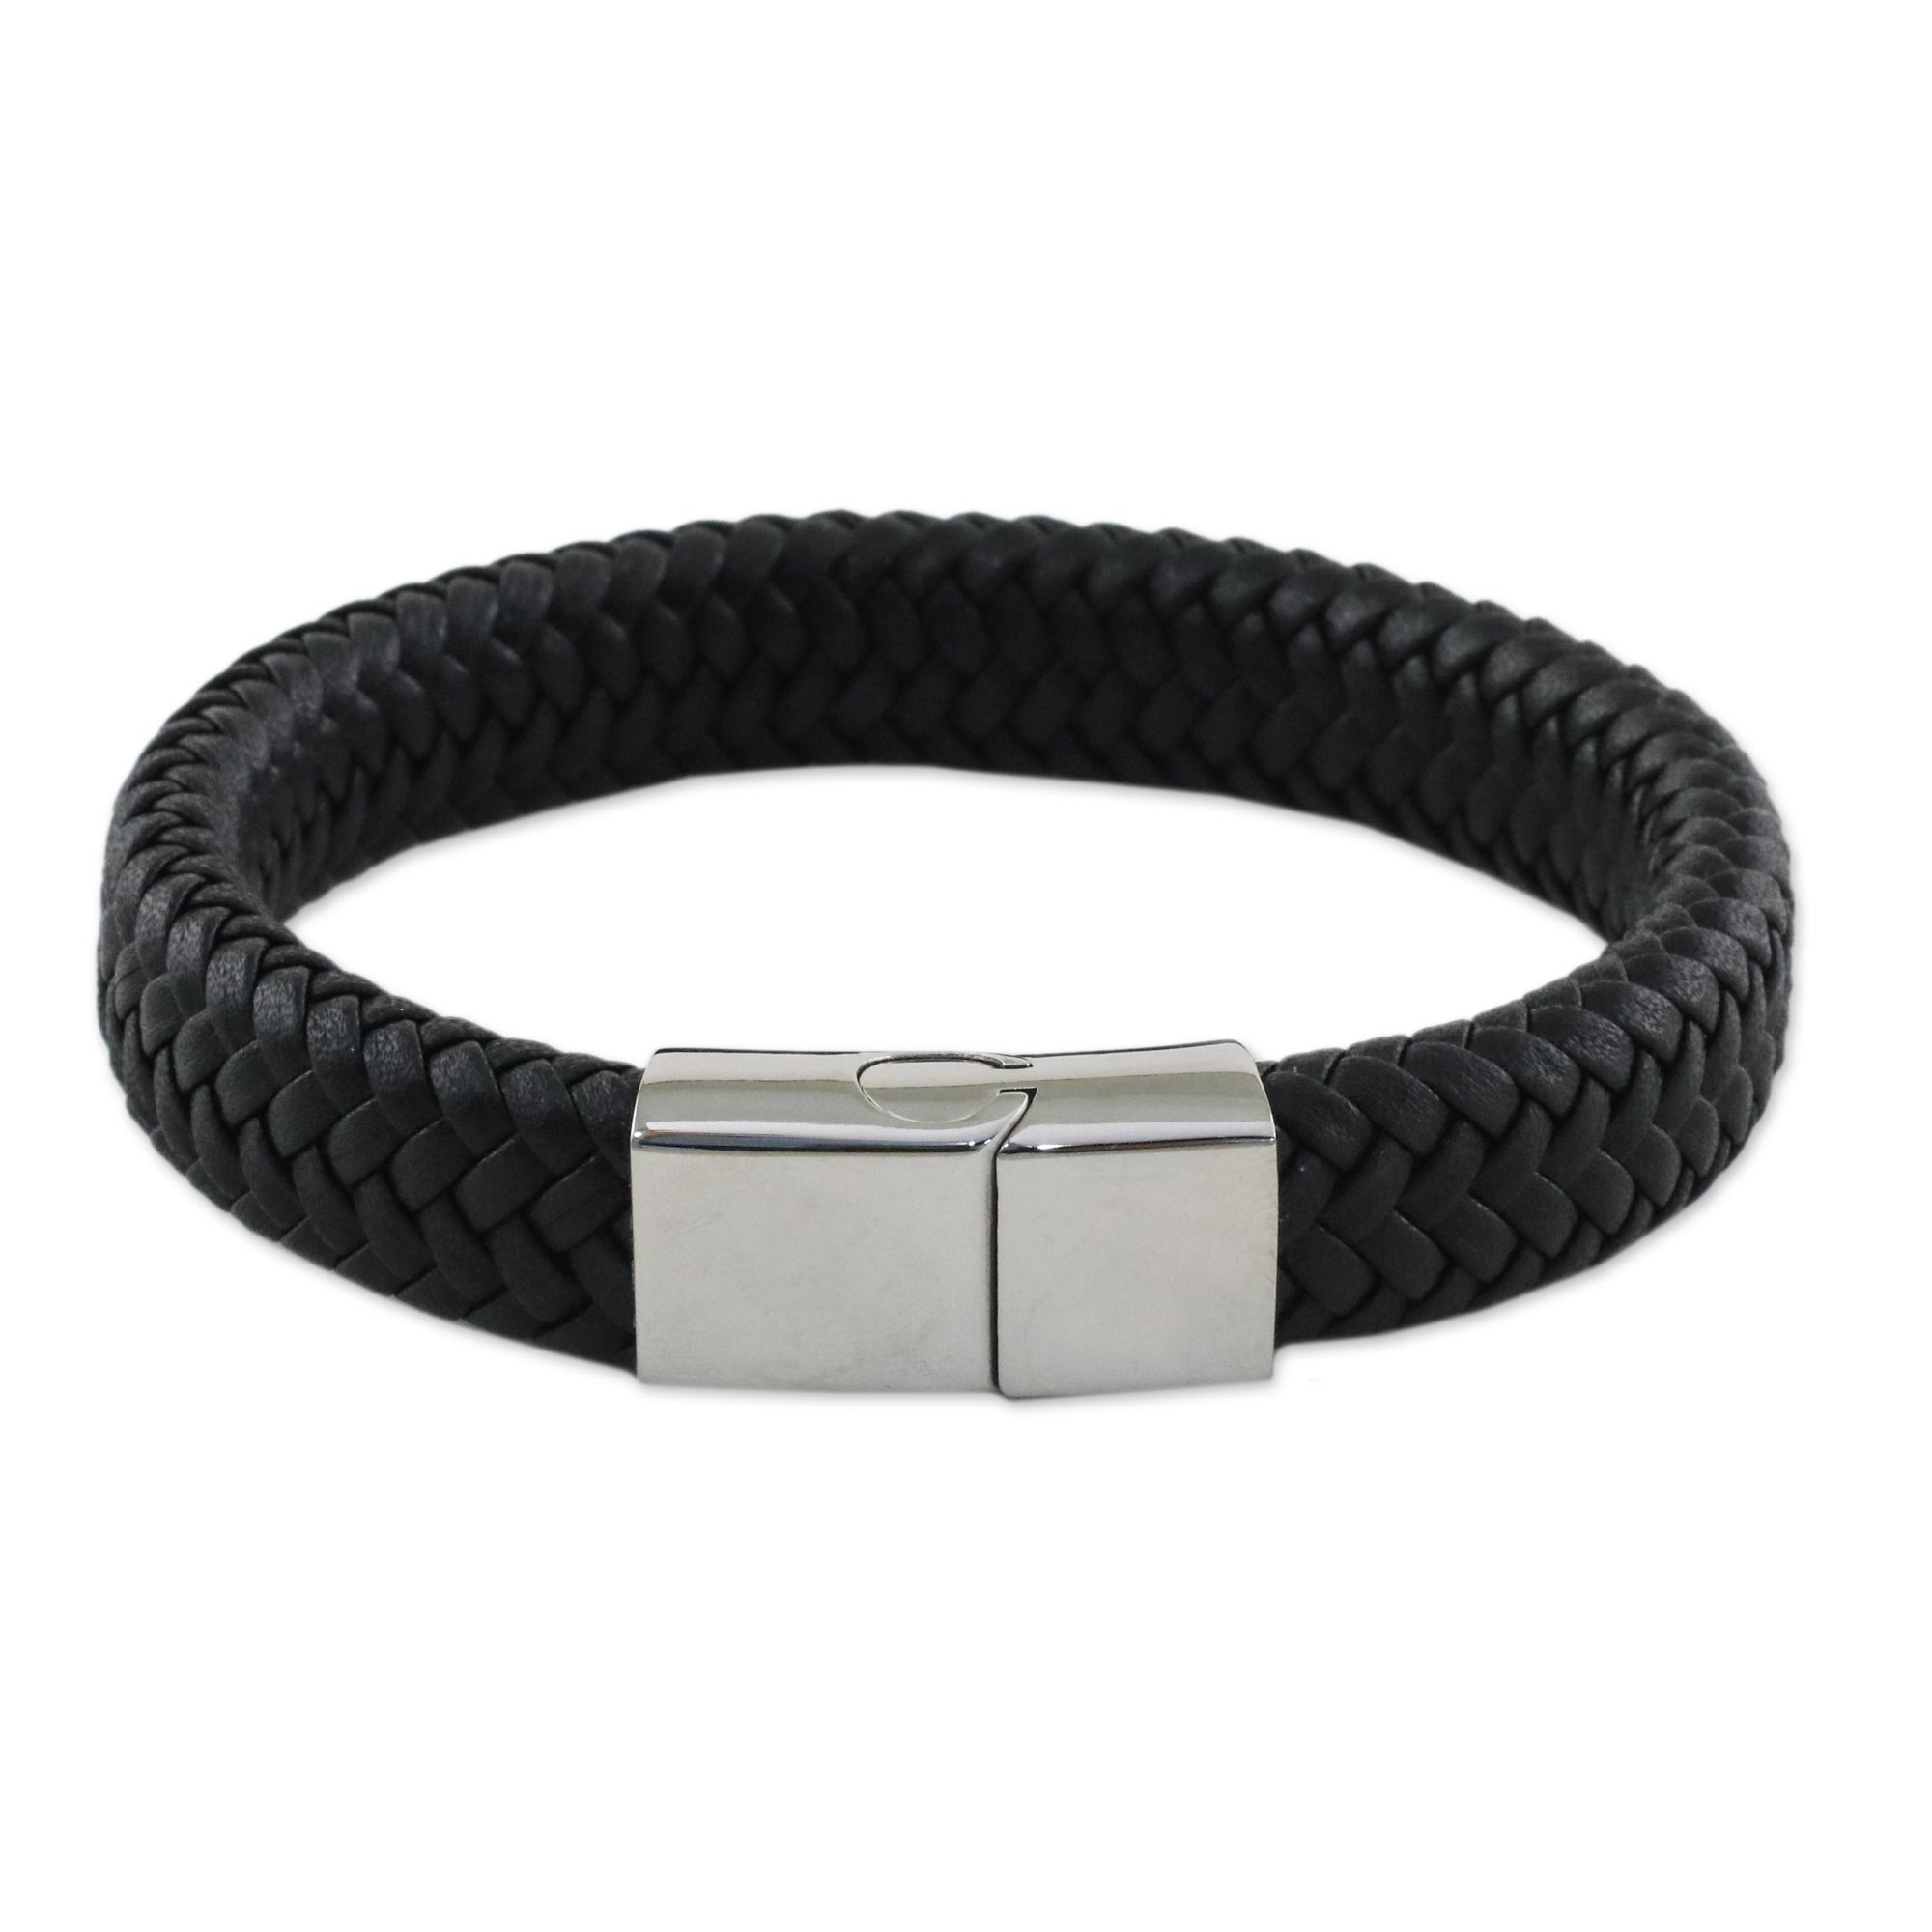 Black Braided Leather Wristband Bracelet from Thailand - Best Friend in ...